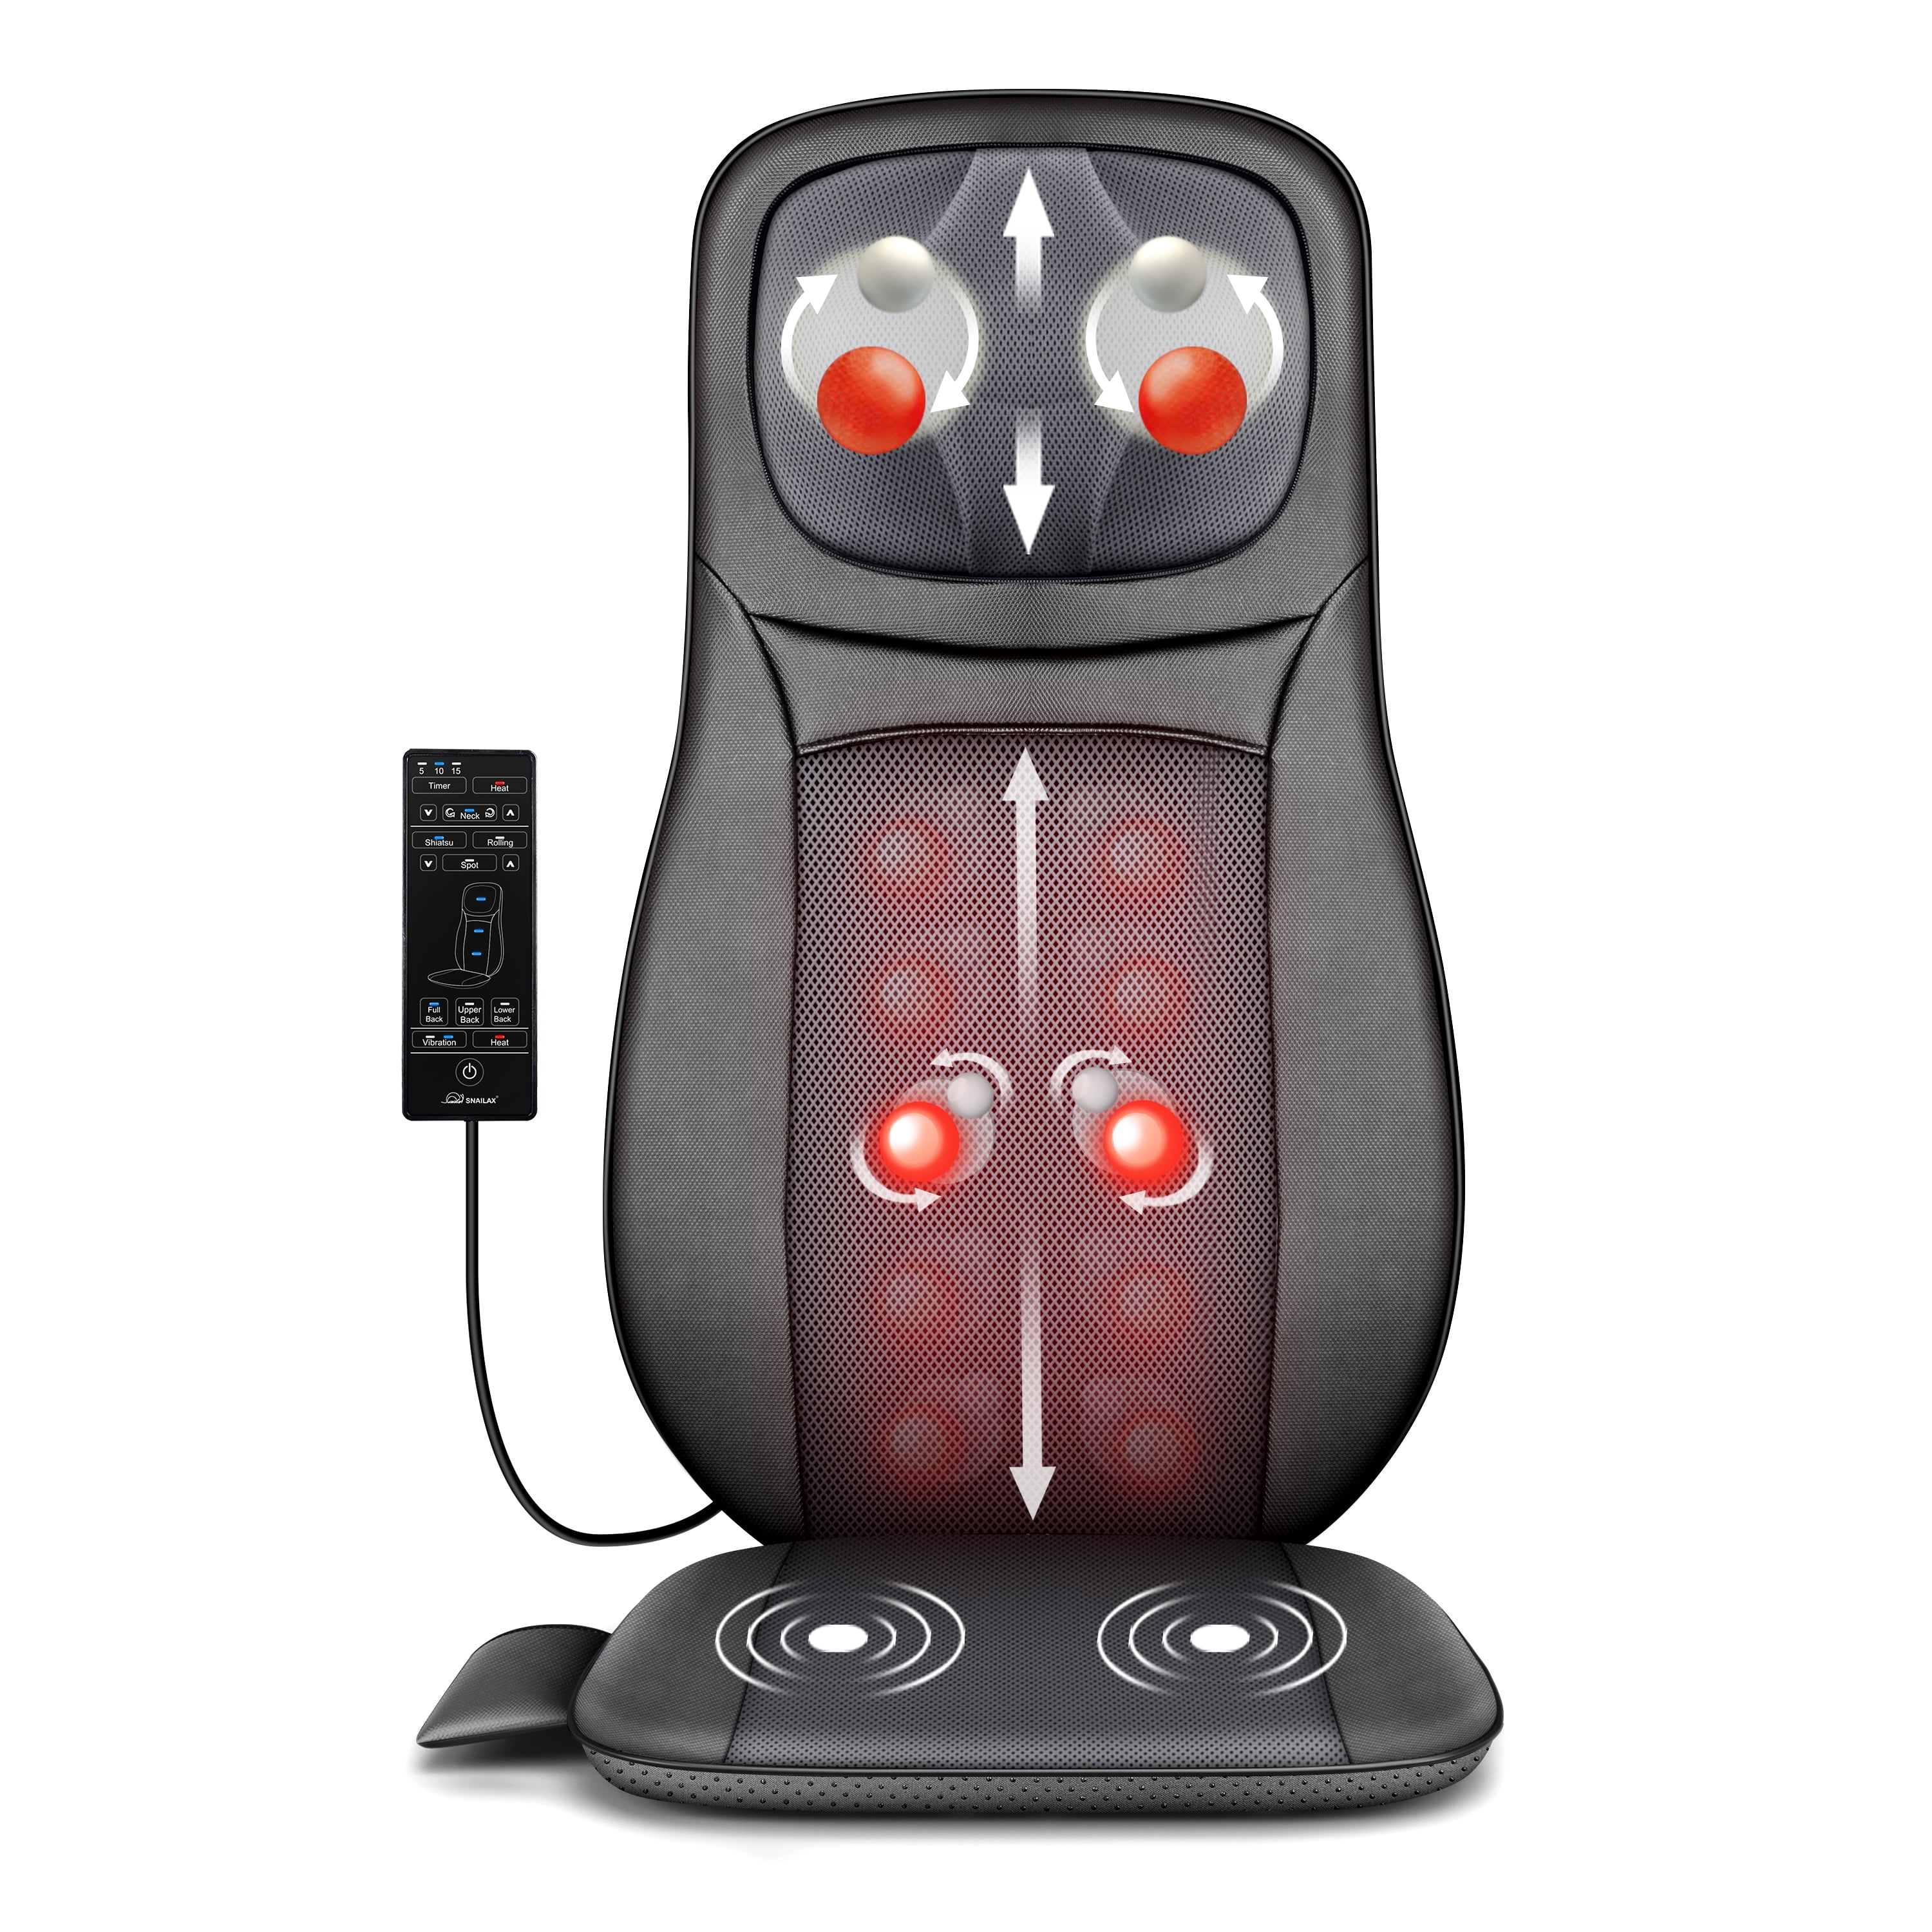 Snailax SL-236 Full Body Massager with Air Compress Kneading & Heat-, 2  years local warranty